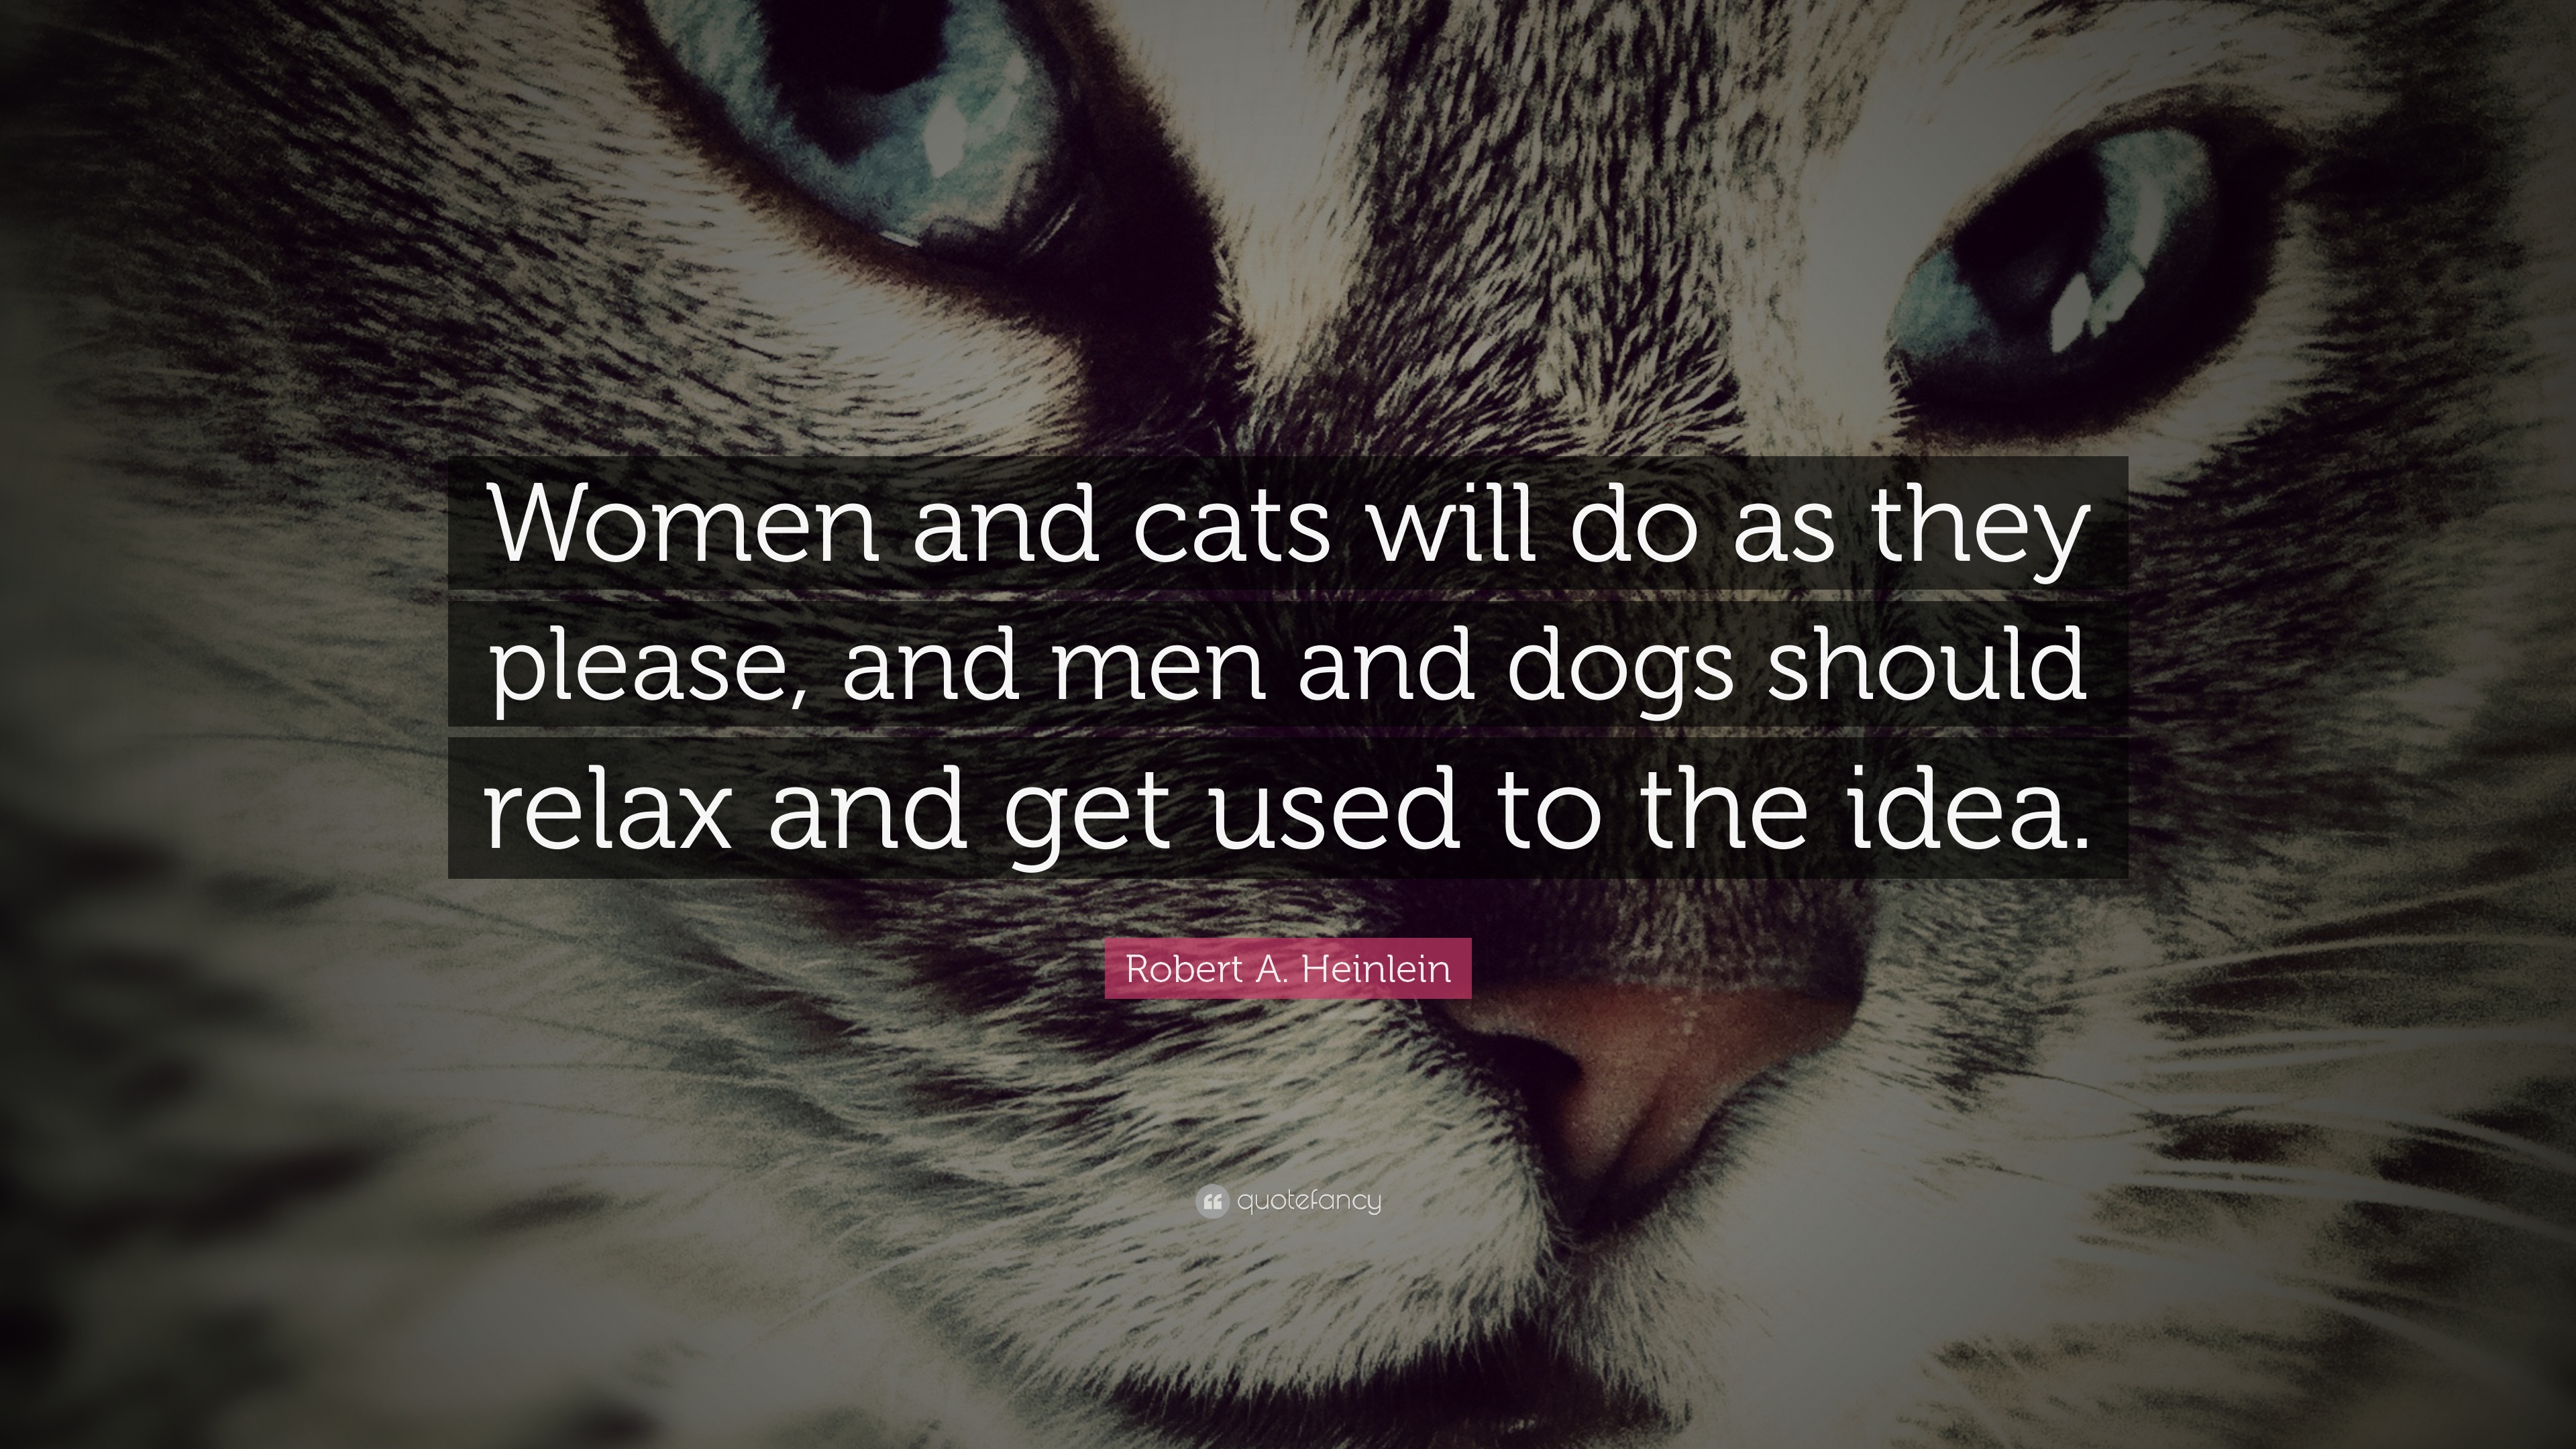 5747-Robert-A-Heinlein-Quote-Women-and-cats-will-do-as-they-please-and